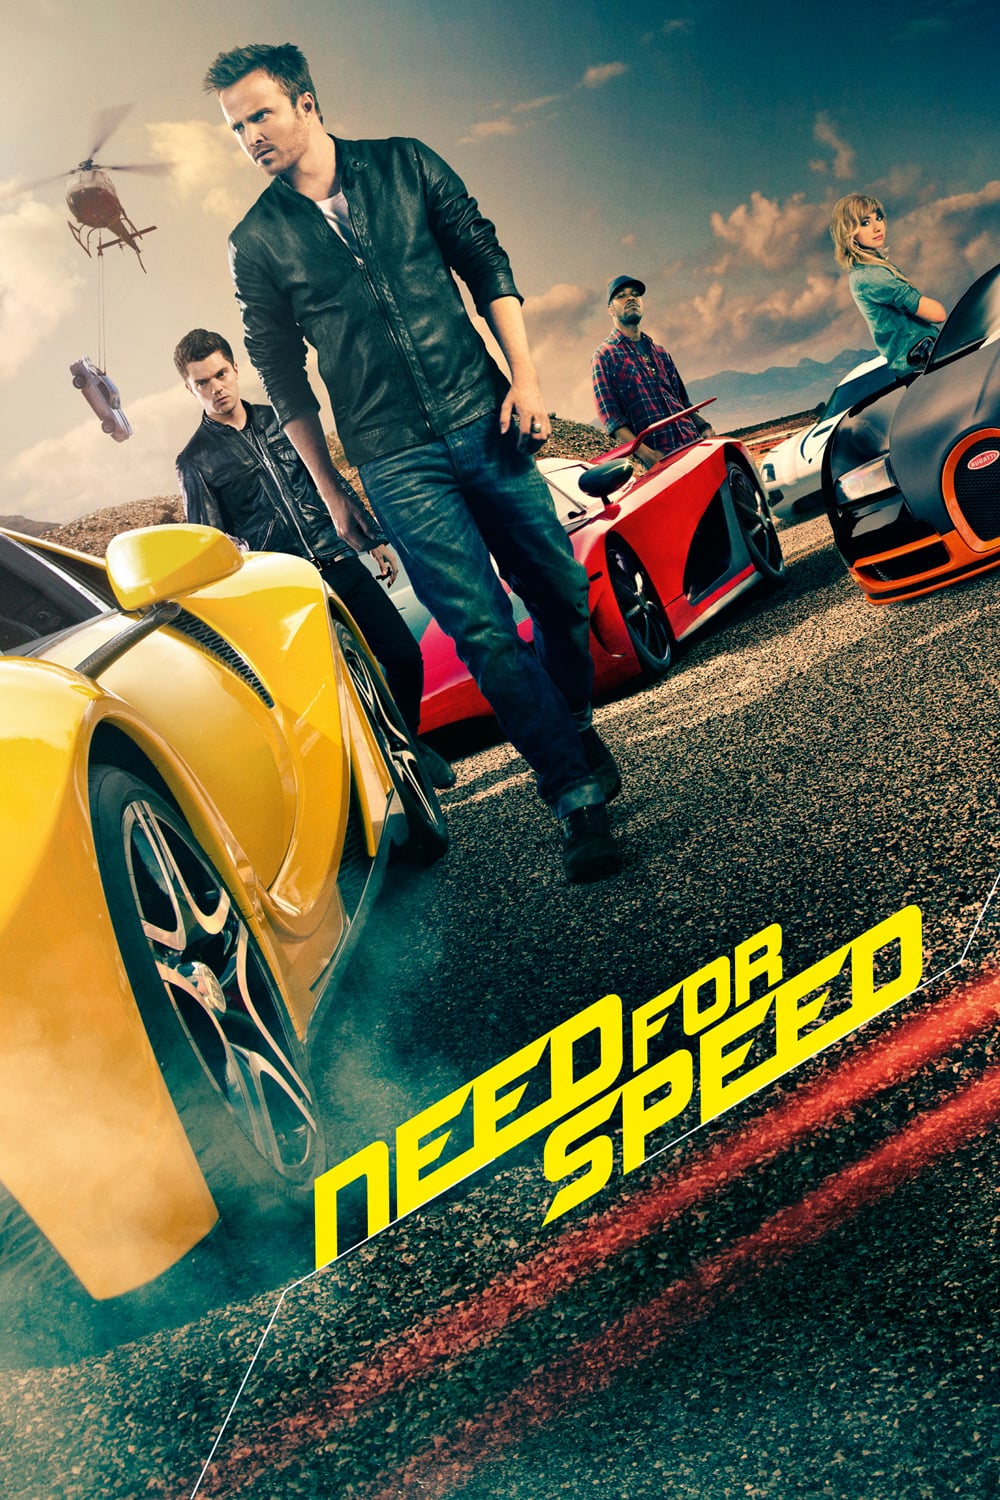 Caratula de Need for Speed (Need for speed) 